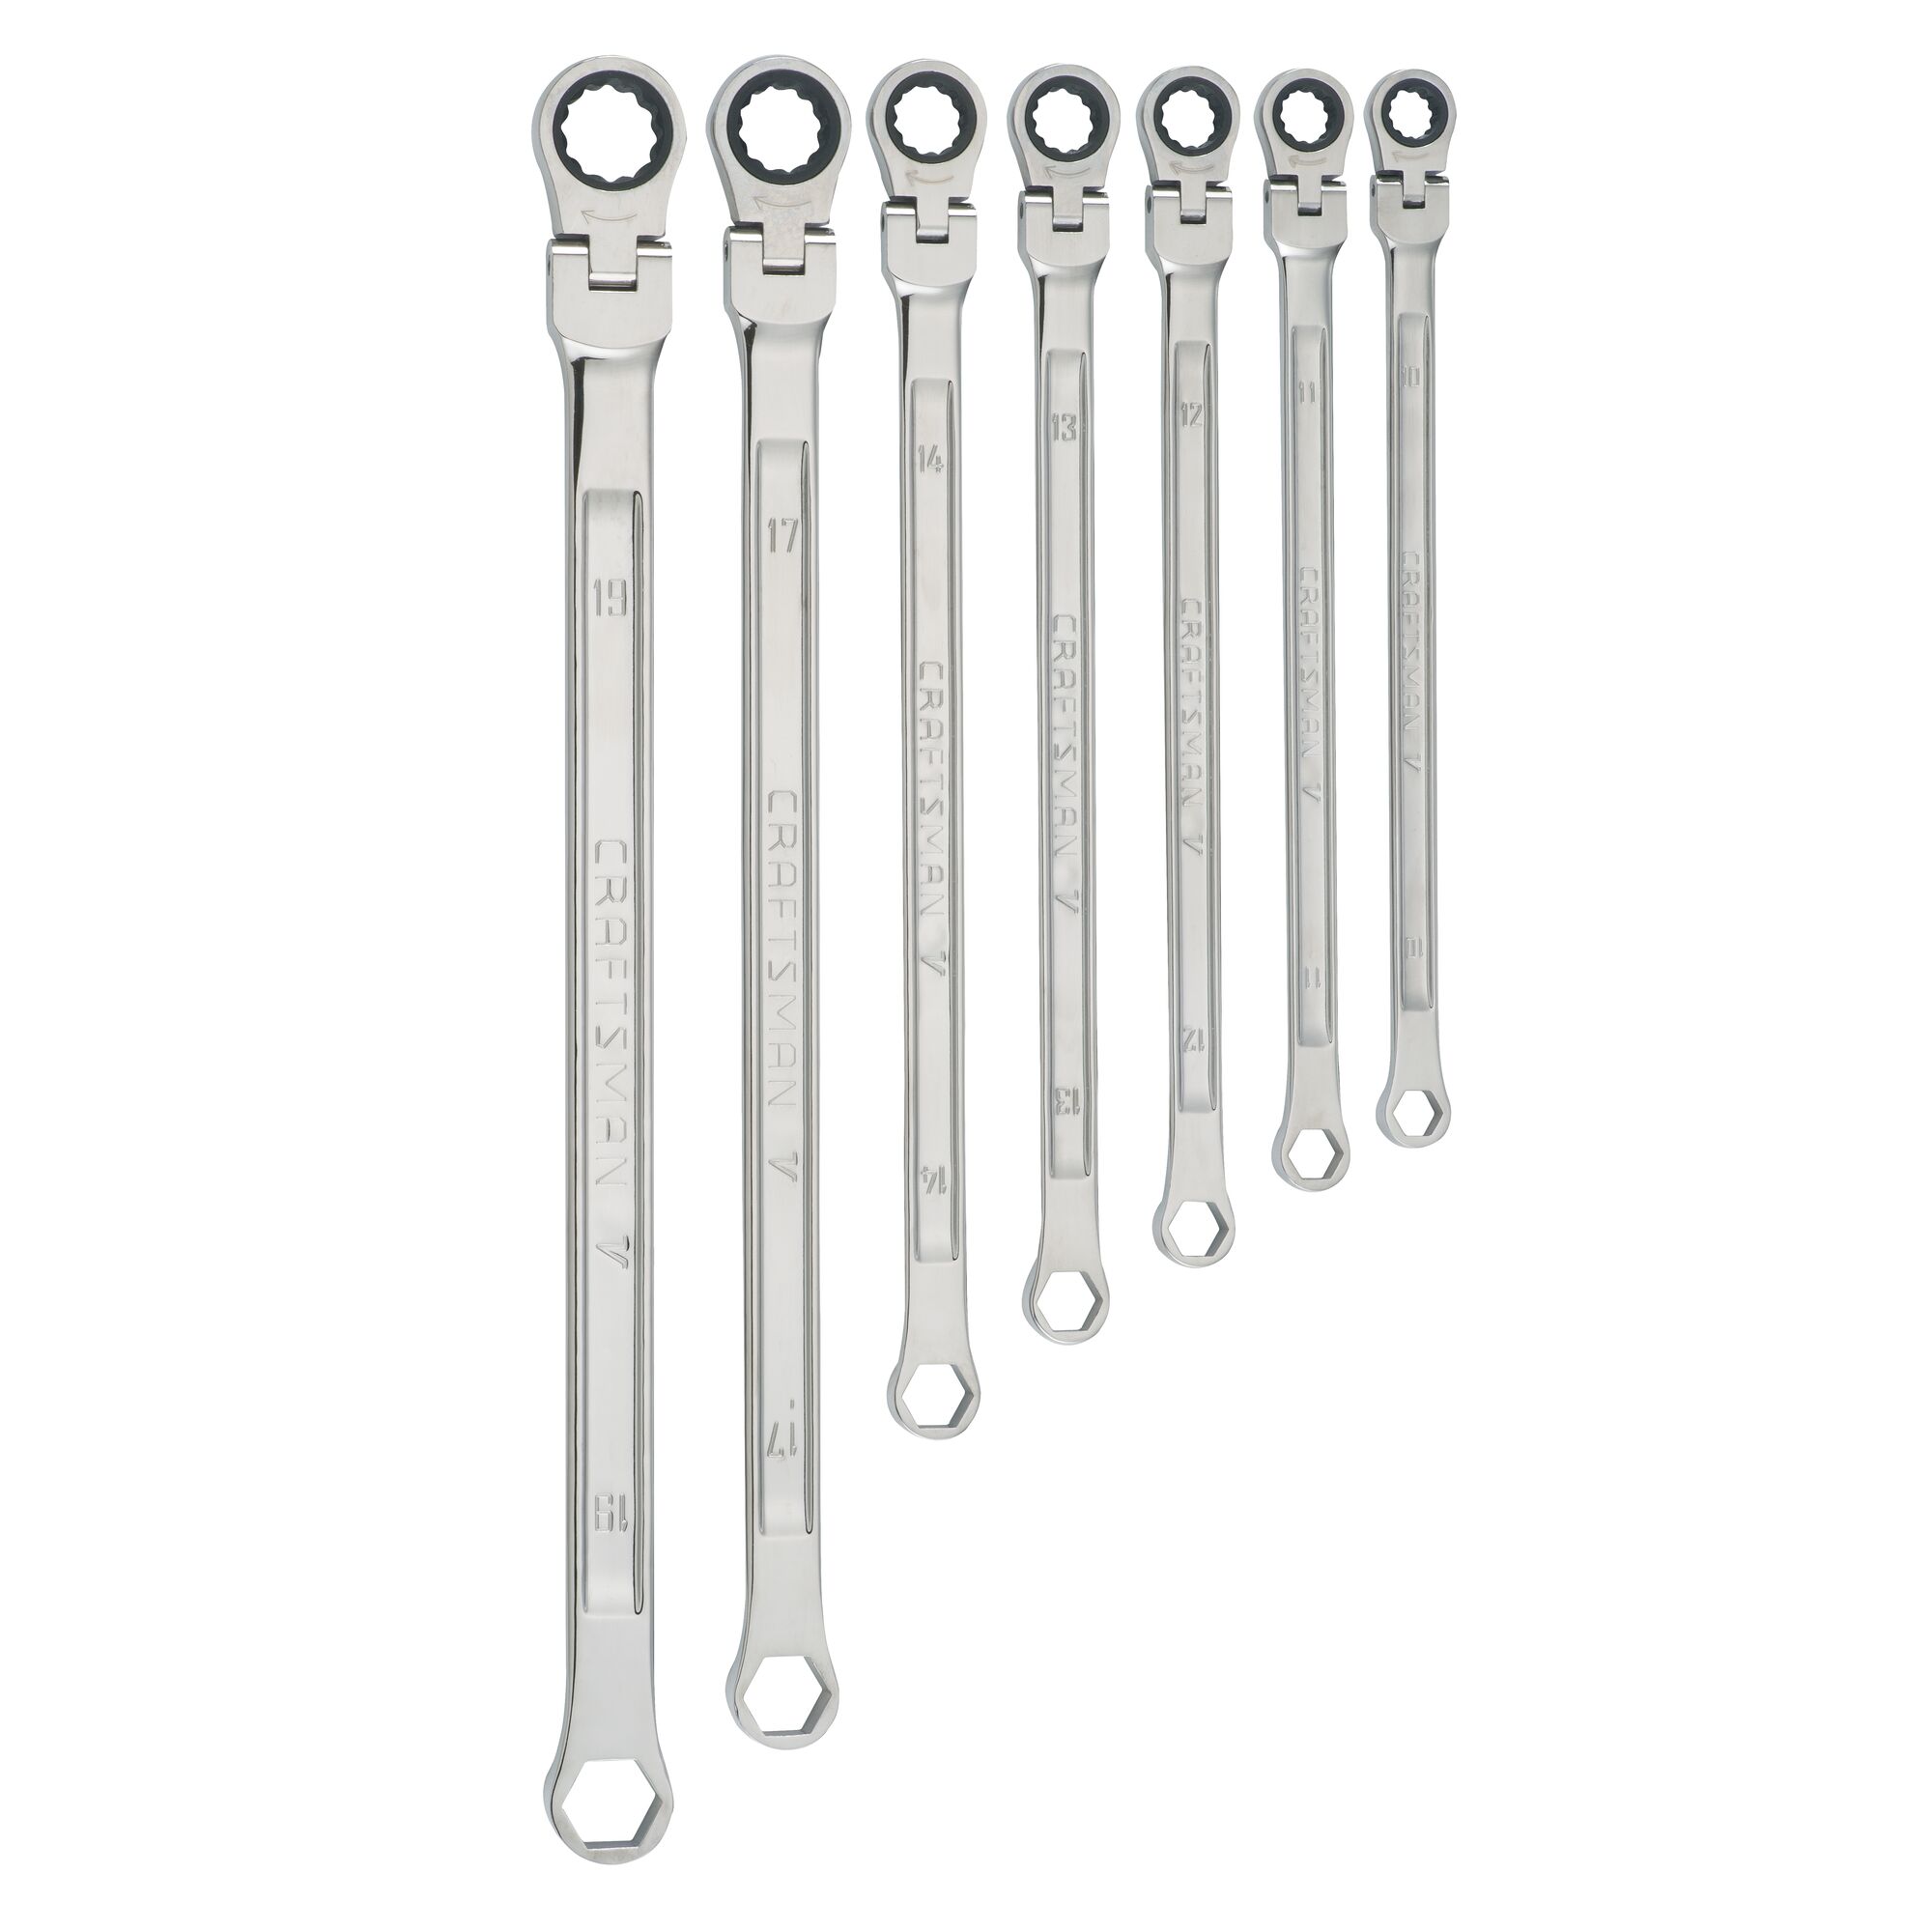 Profile of V series XXL metric ratcheting single flex head double box end wrench set (7 piece).